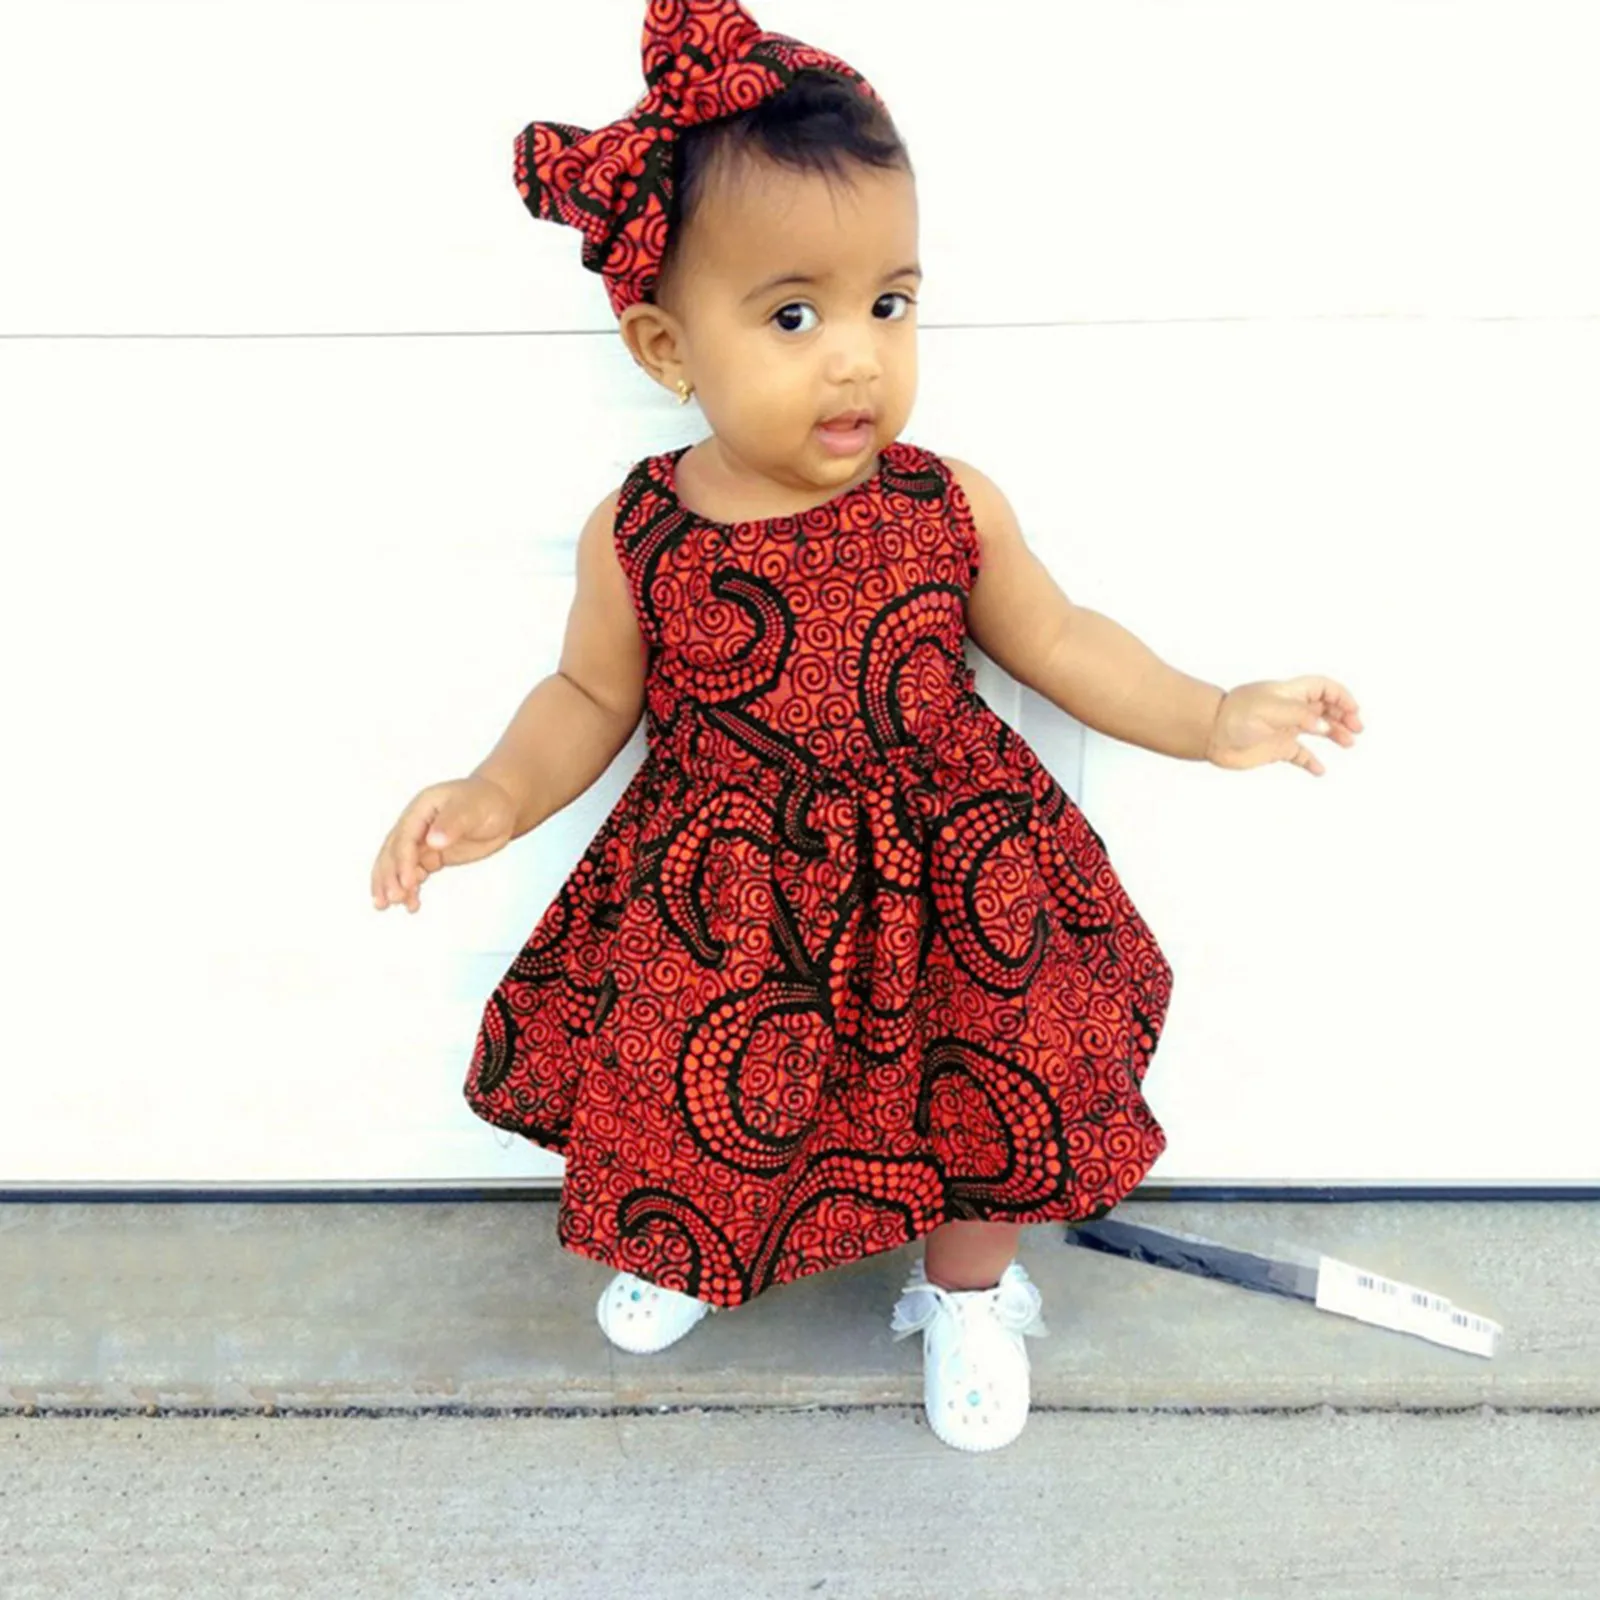 Dresses classic 6M-3Y Toddler Kids Baby Girls Dress African Dashiki Traditional Style Sleeveless Ankara Dresses With Headband Infant Outfits cute dresses